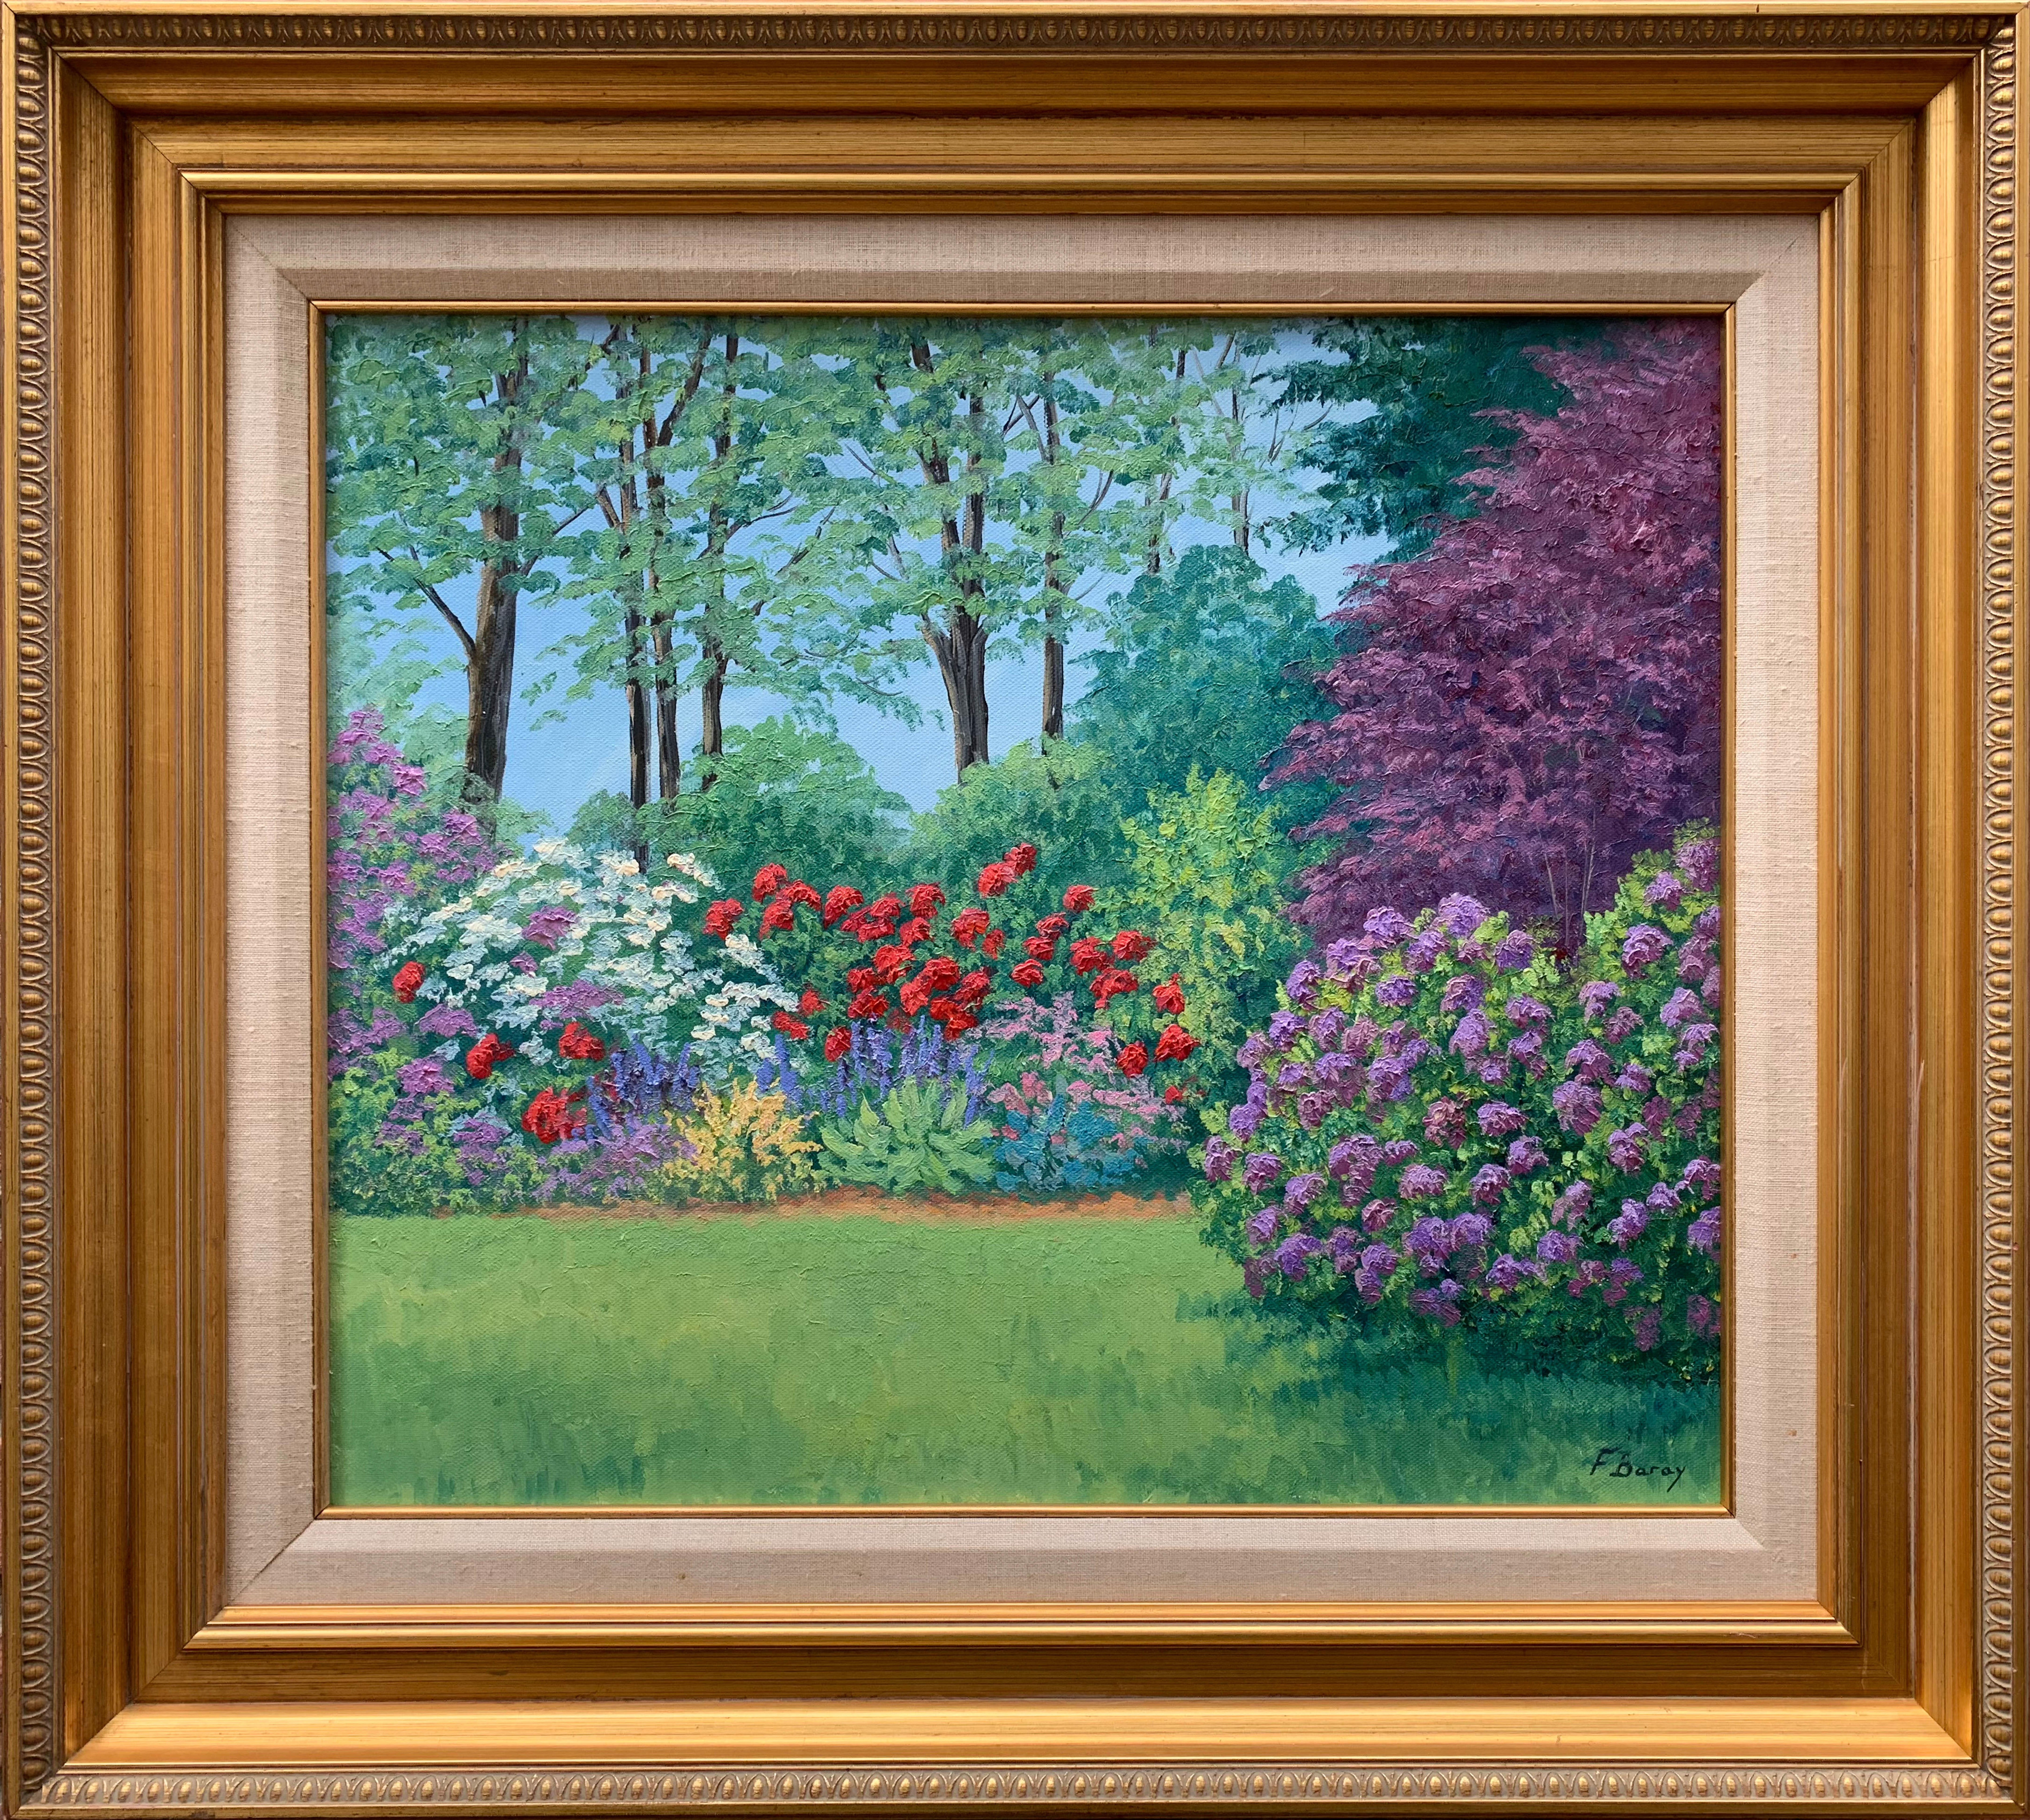 Les Rhododendrons - Painting by Frederique Baray